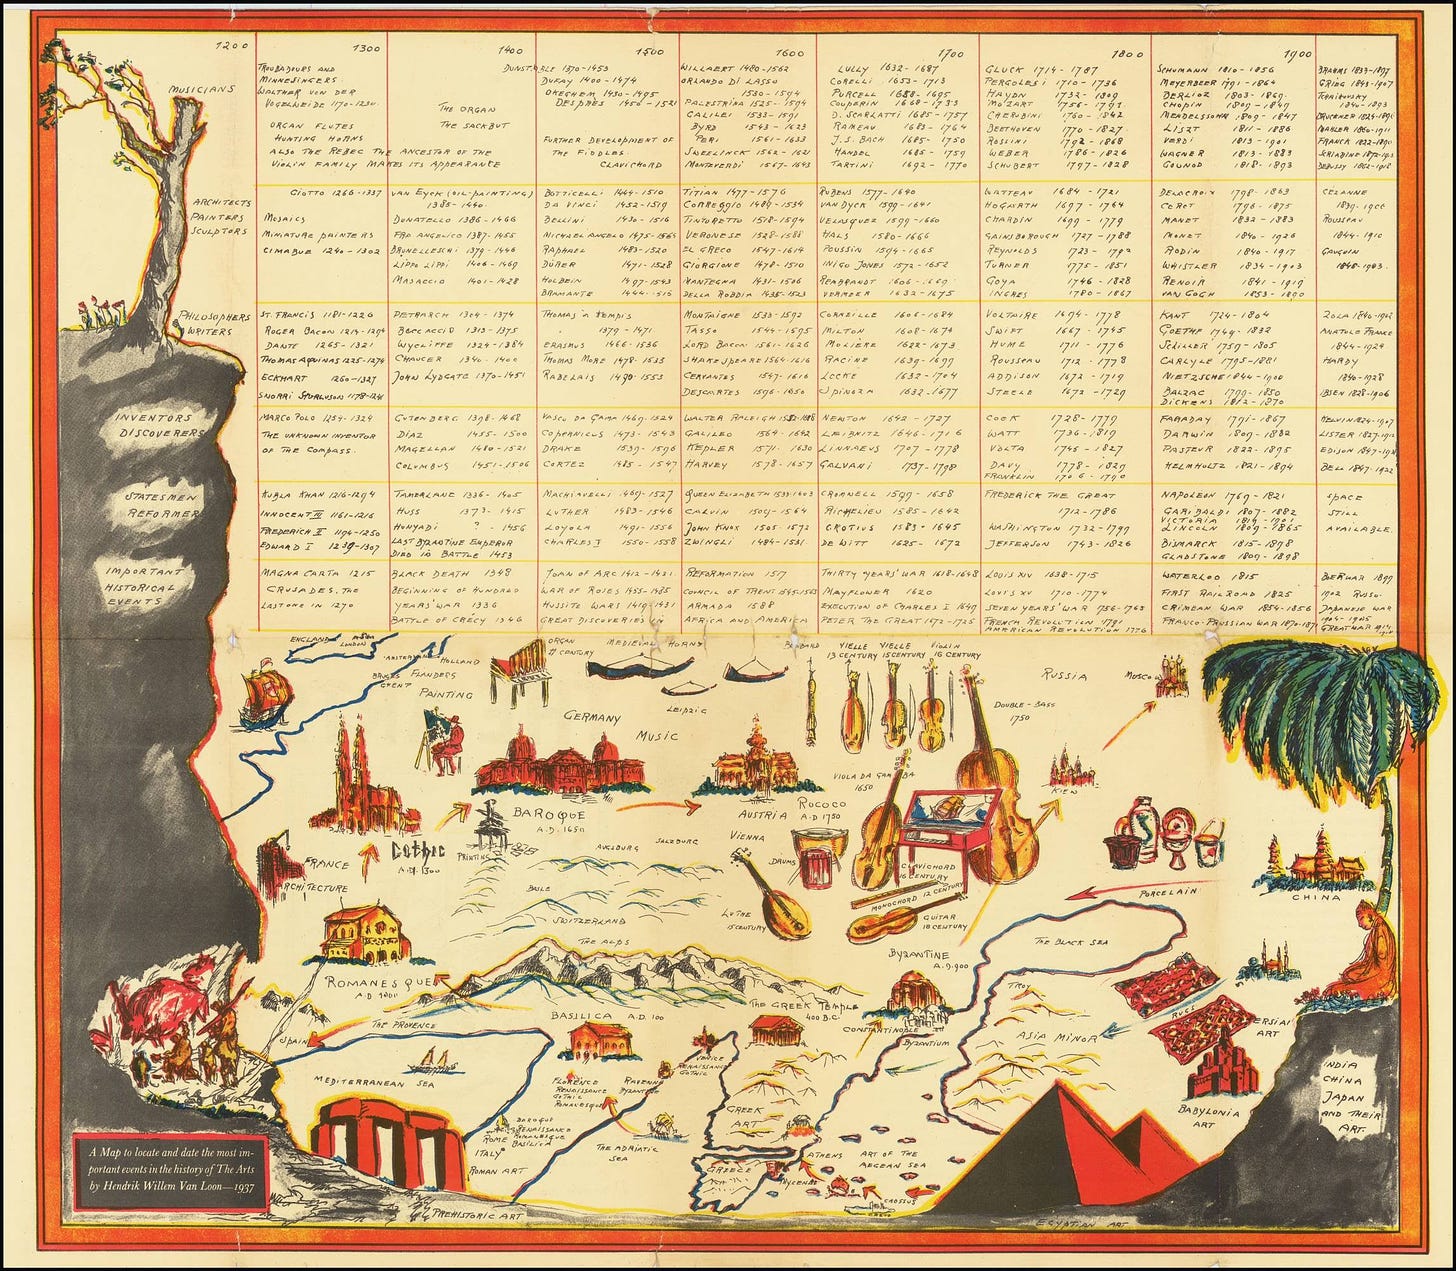 A map/guide to locate and date the most important events in the history of  The Arts, 1937 by Hendrik Willem Van Loon. [13184X11498]: coolguides